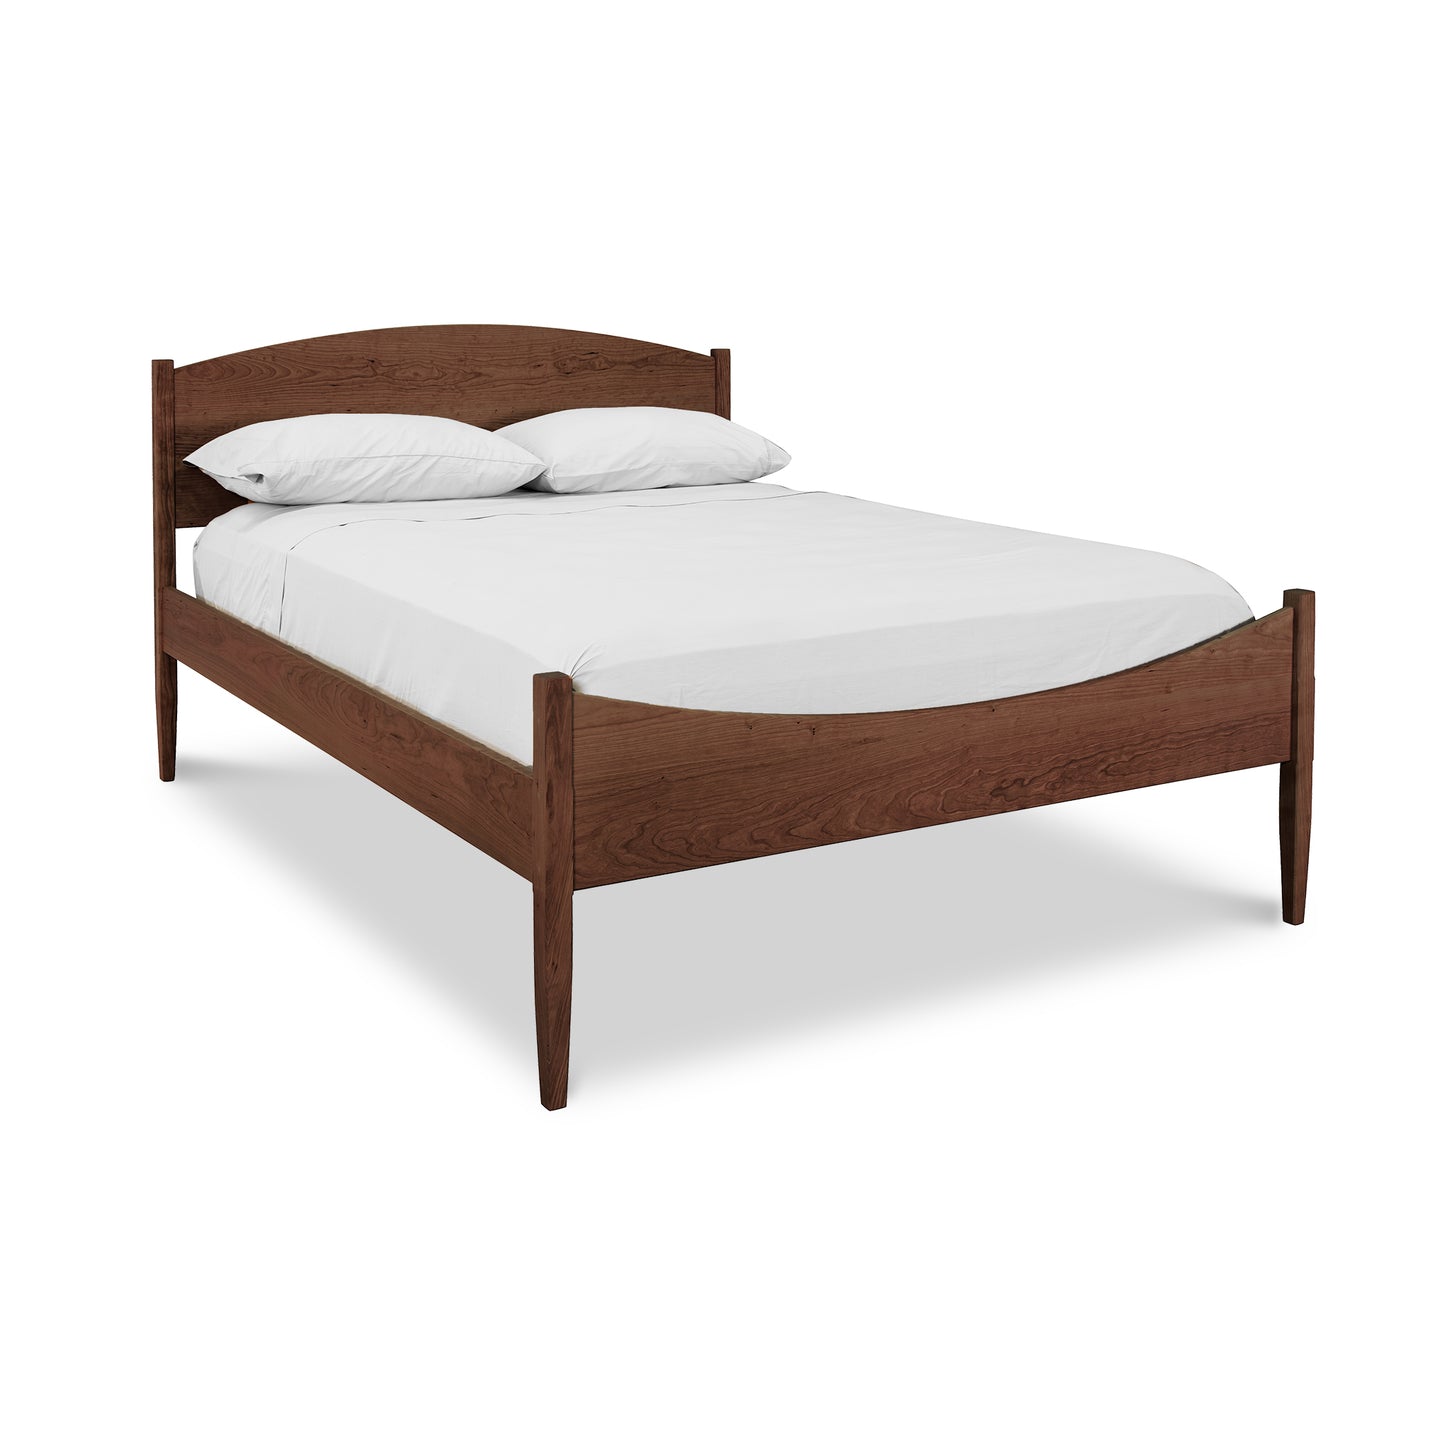 An eco-friendly Maple Corner Woodworks Vermont Shaker Moon Bed with a wooden frame and white sheets. Additionally, it offers optional underbed storage units for convenience.